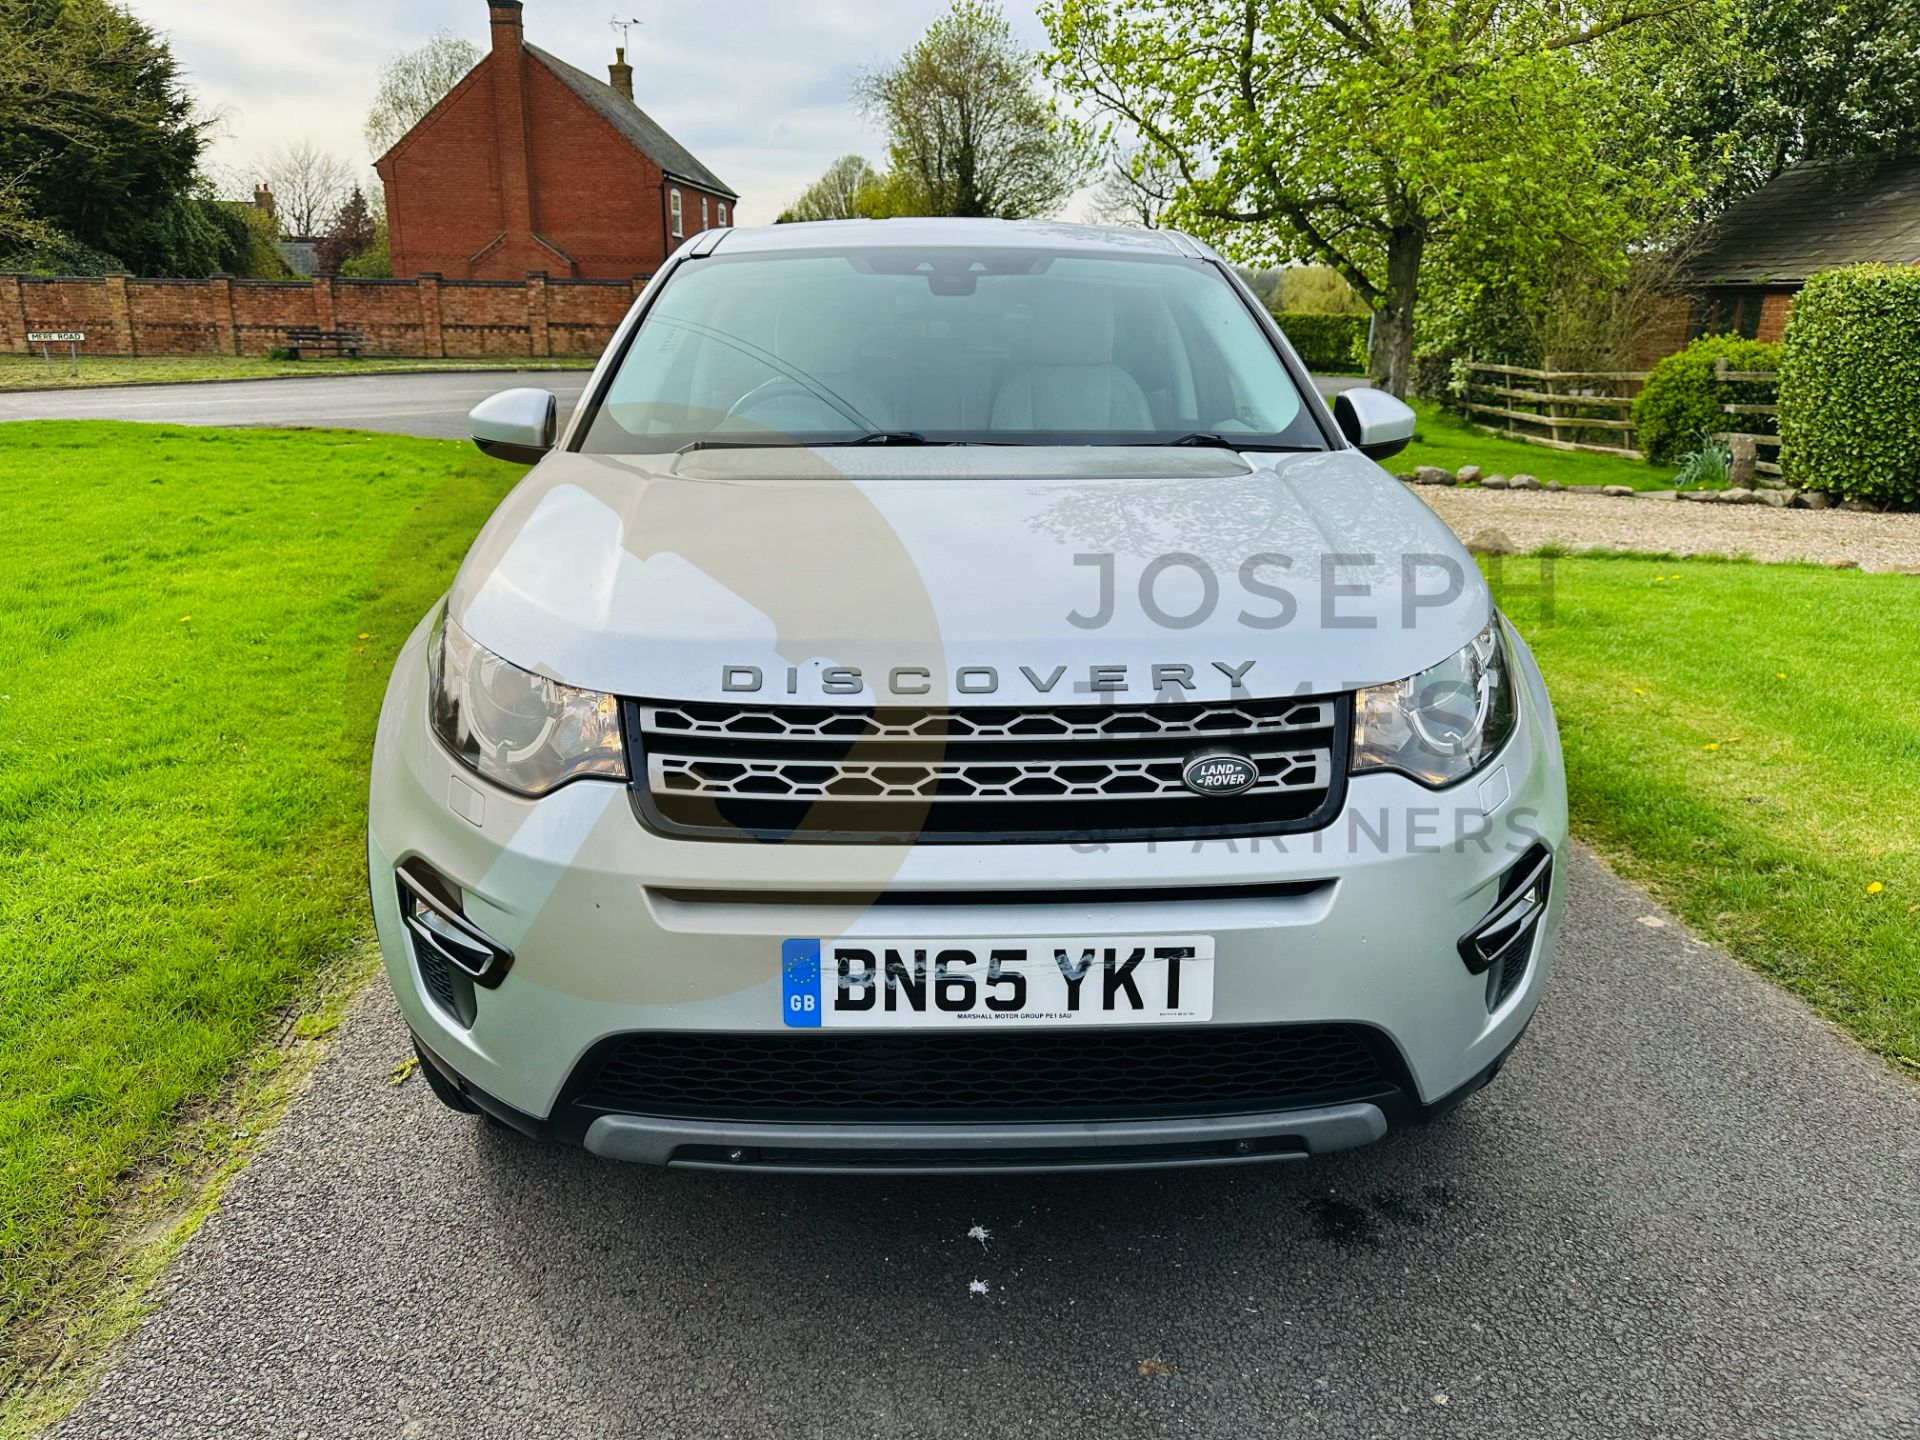 (ON SALE) LAND ROVER DISCOVERY SPORT *SE TECH* 7 SEATER SUV (2016 - EURO 6) 2.0 TD4 - AUTO *NO VAT* - Image 3 of 41